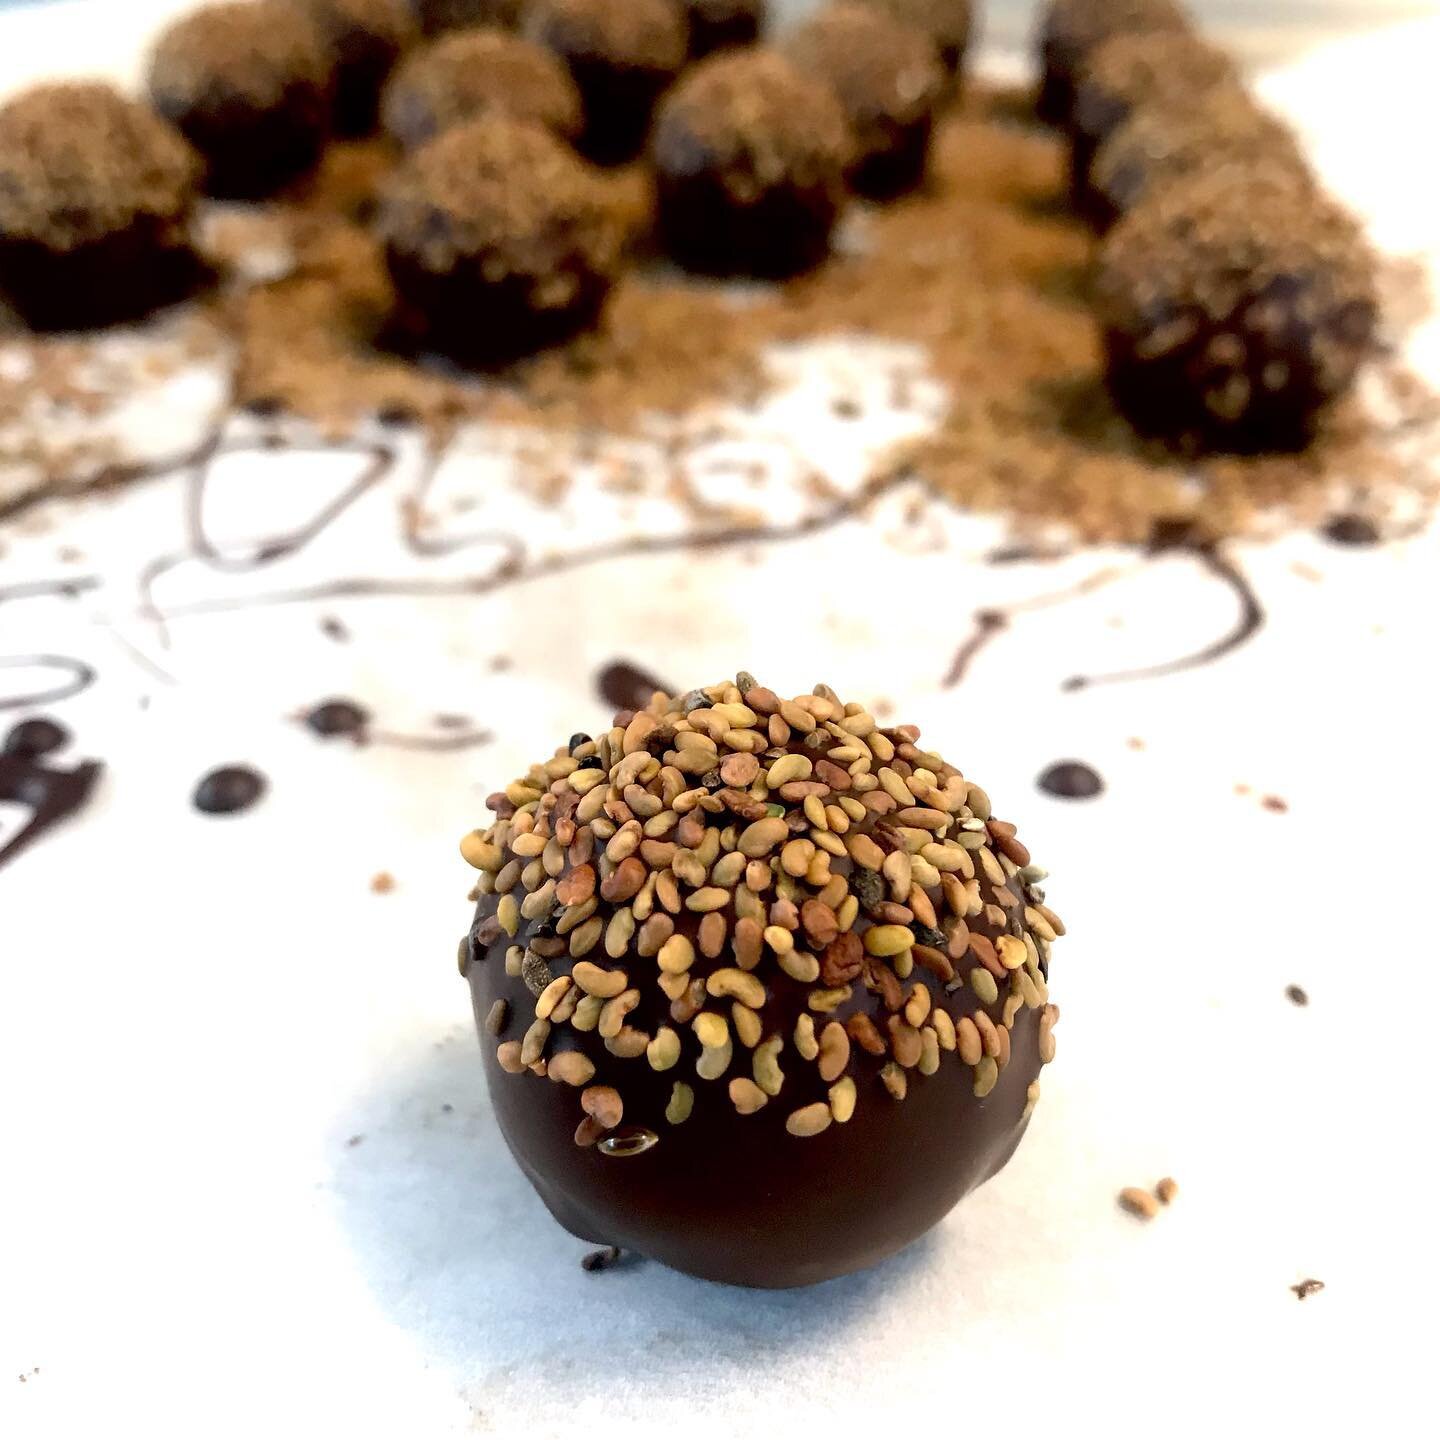 Introducing our newest flavour, Matcha Alfalfa Seed. This one is a special treat with the sweet umami richness of matcha blended into the filling with almonds, cocoa, tahini and coconut oil. The alfalfa seeds add texture and crunch with a very gentle